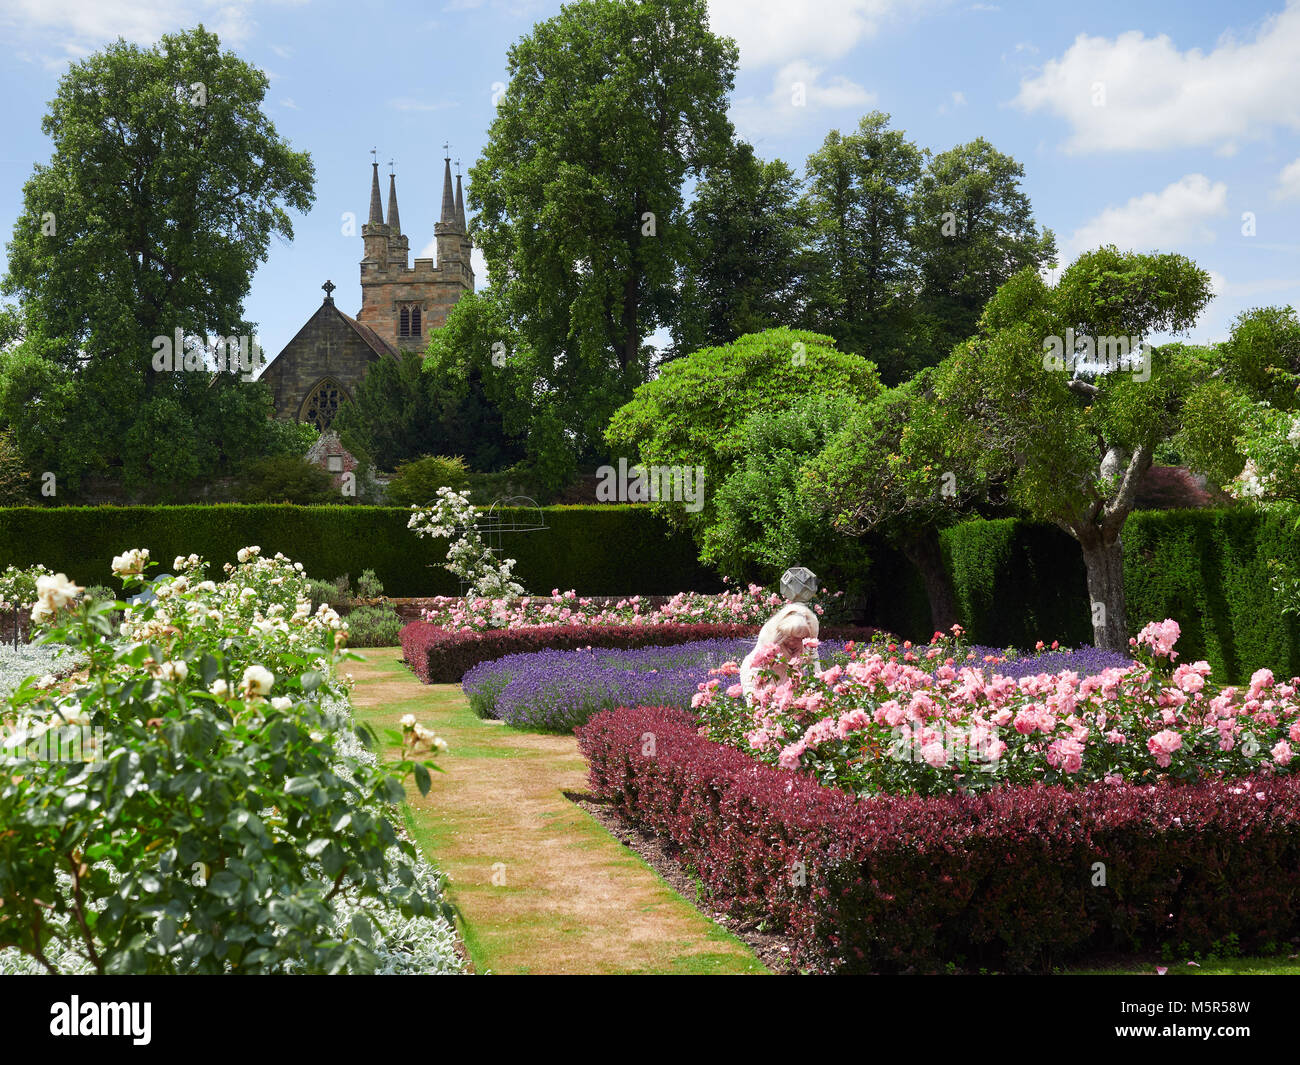 Flower gardens at the historic medieval grounds and buildings of Penhurst Place. Stock Photo